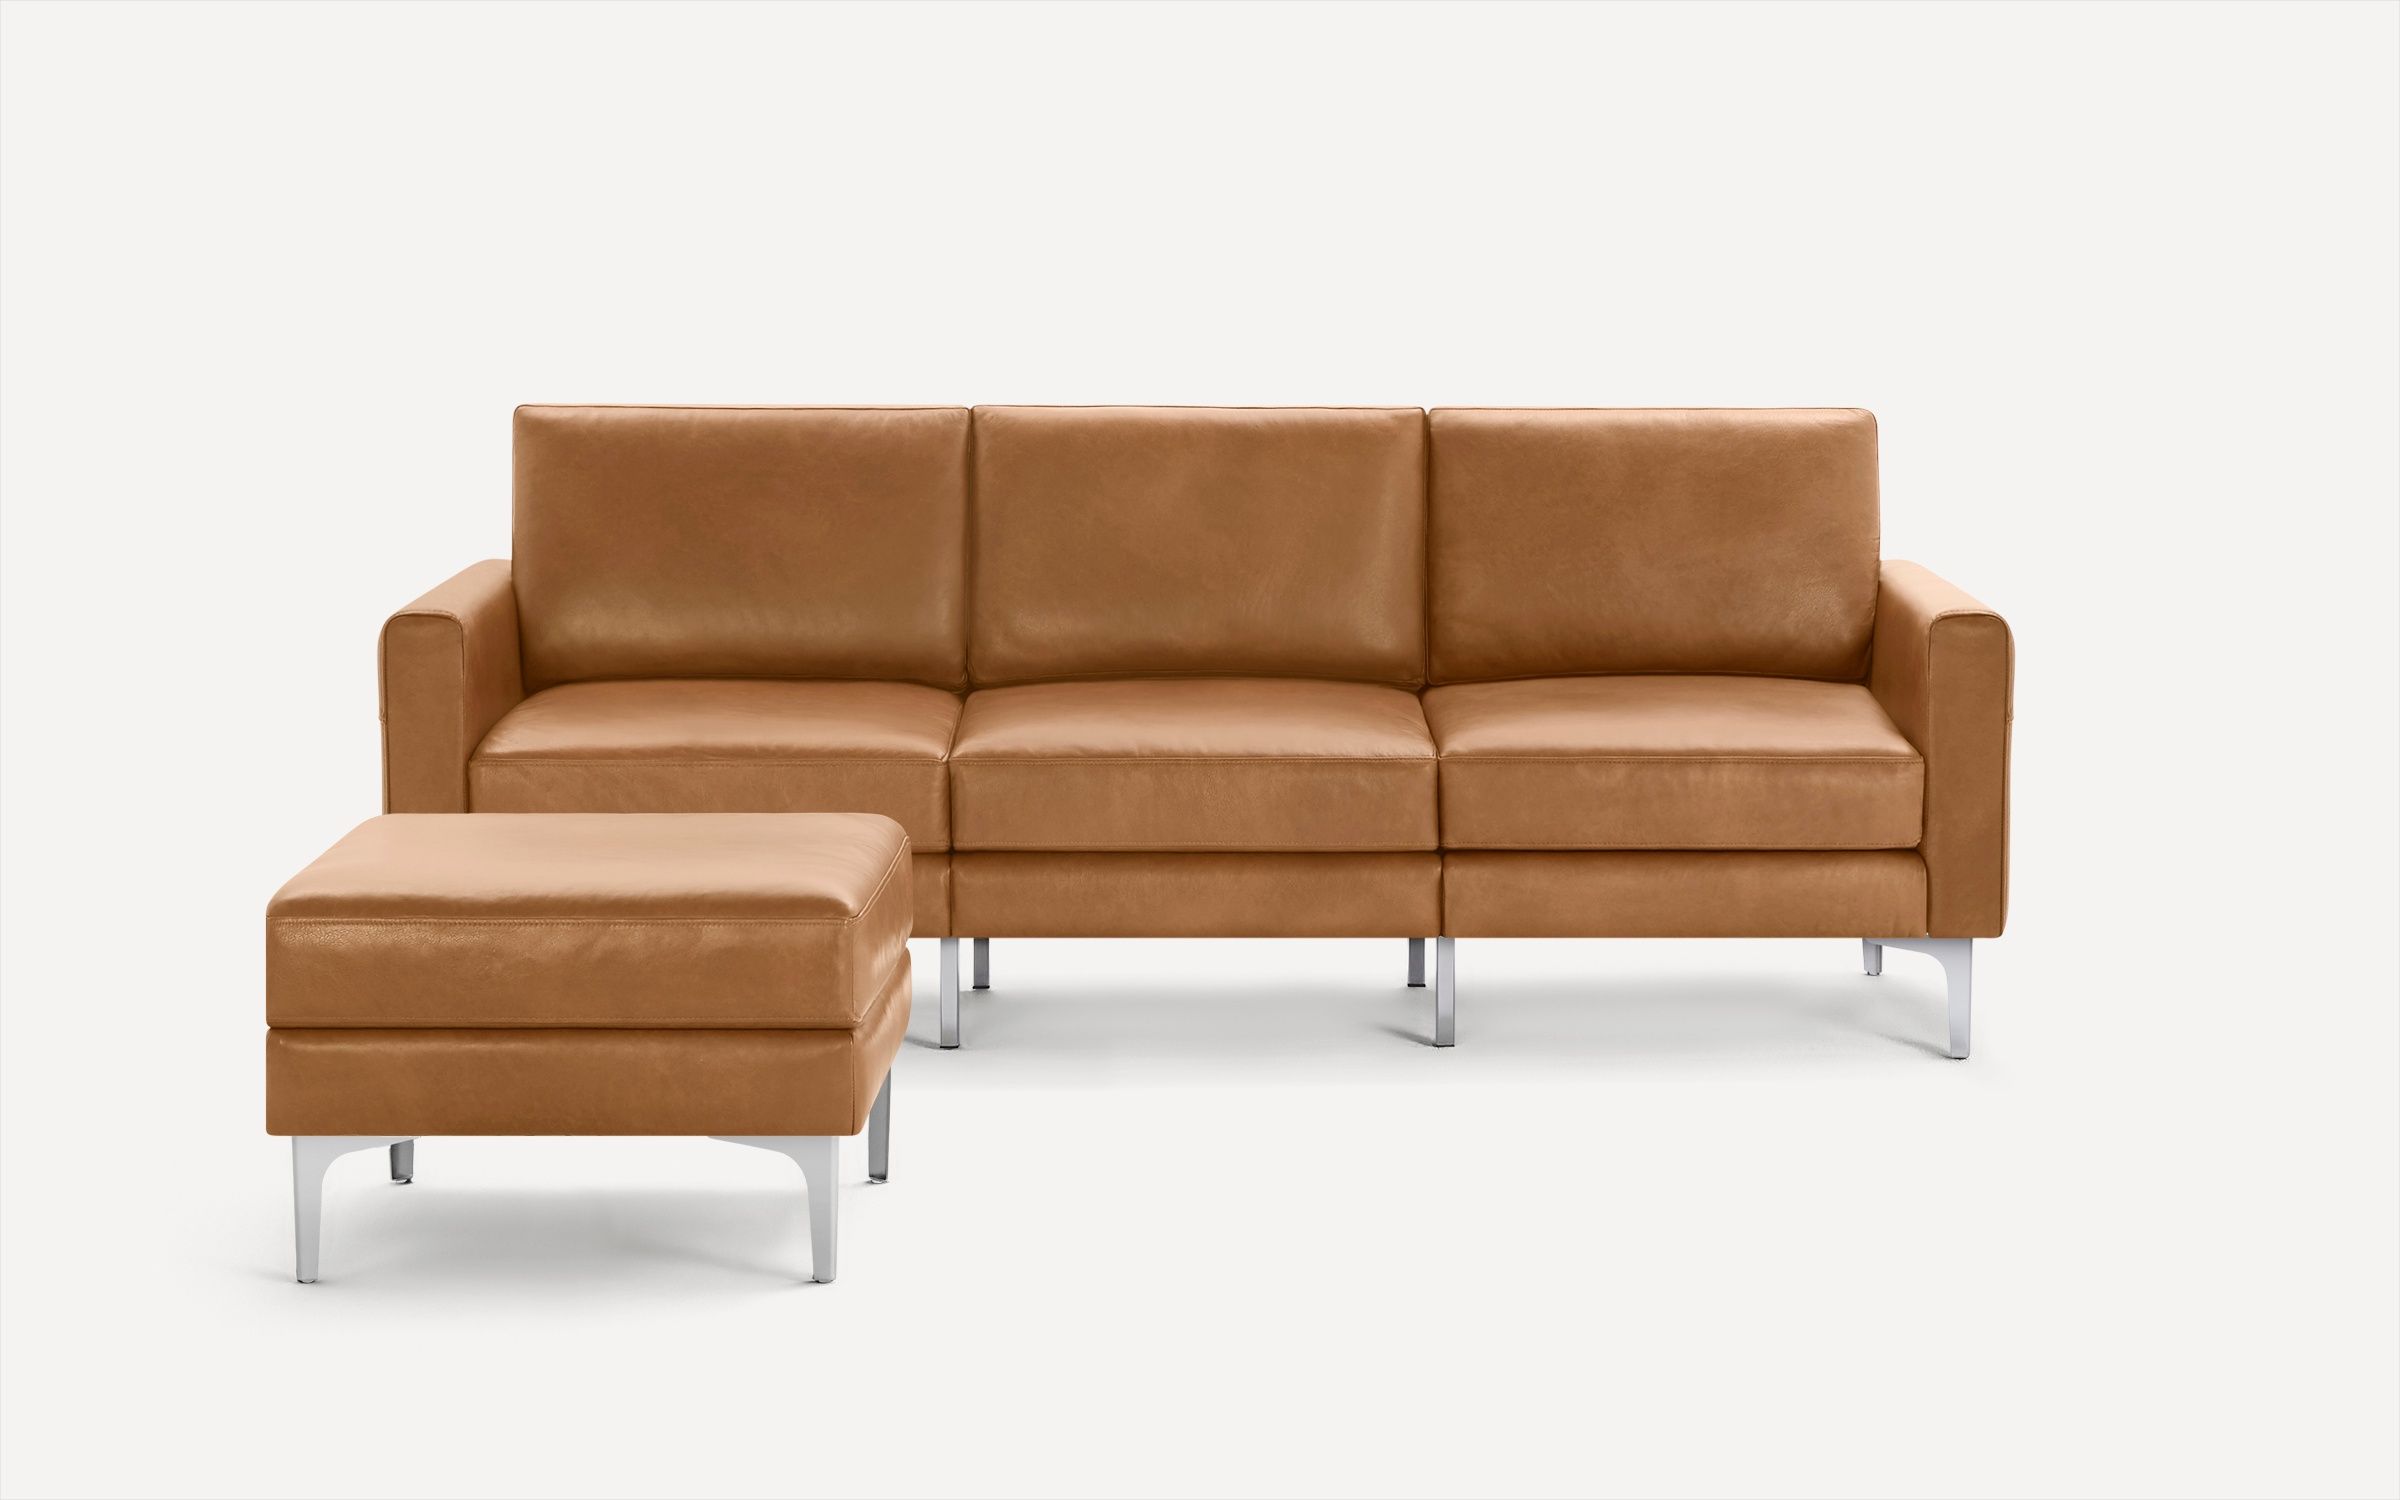 The Nomad Leather Sofa with Ottoman: Customizable Sectional Furniture | Burrow | Burrow